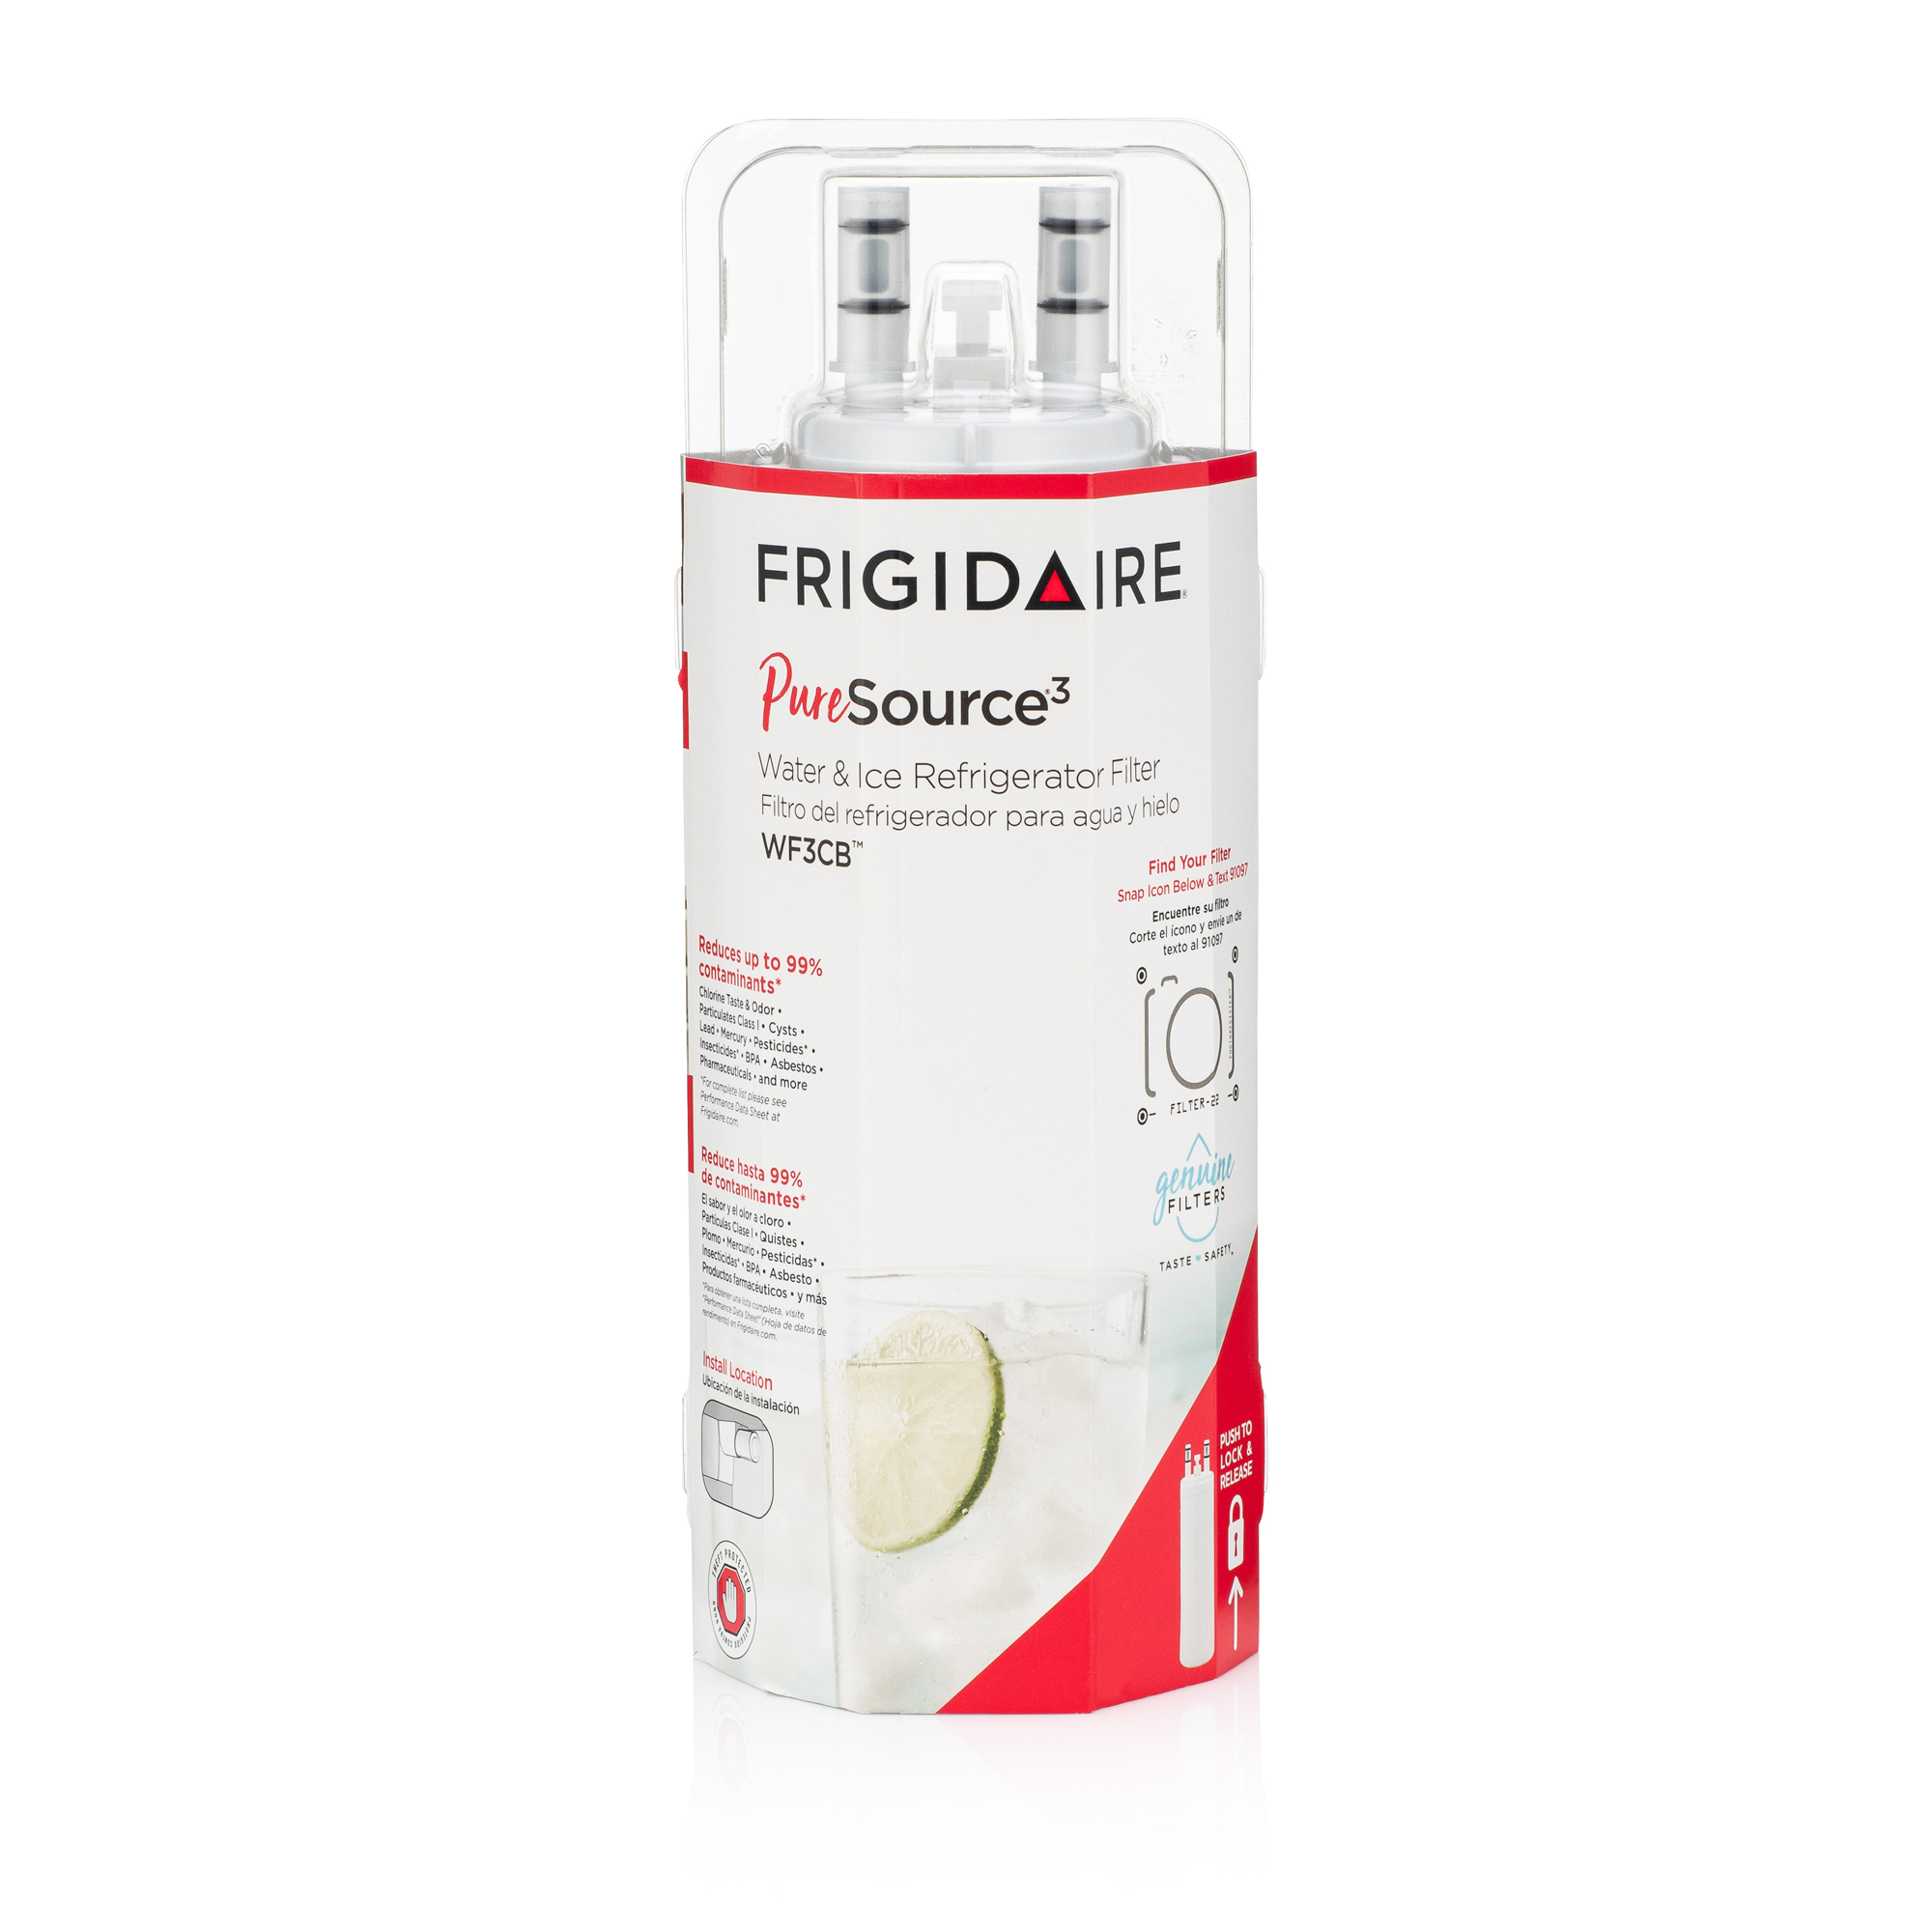 WF3CB Frigidaire Refrigerator Water Filter for Water and Ice, 200 Gallons - image 1 of 4